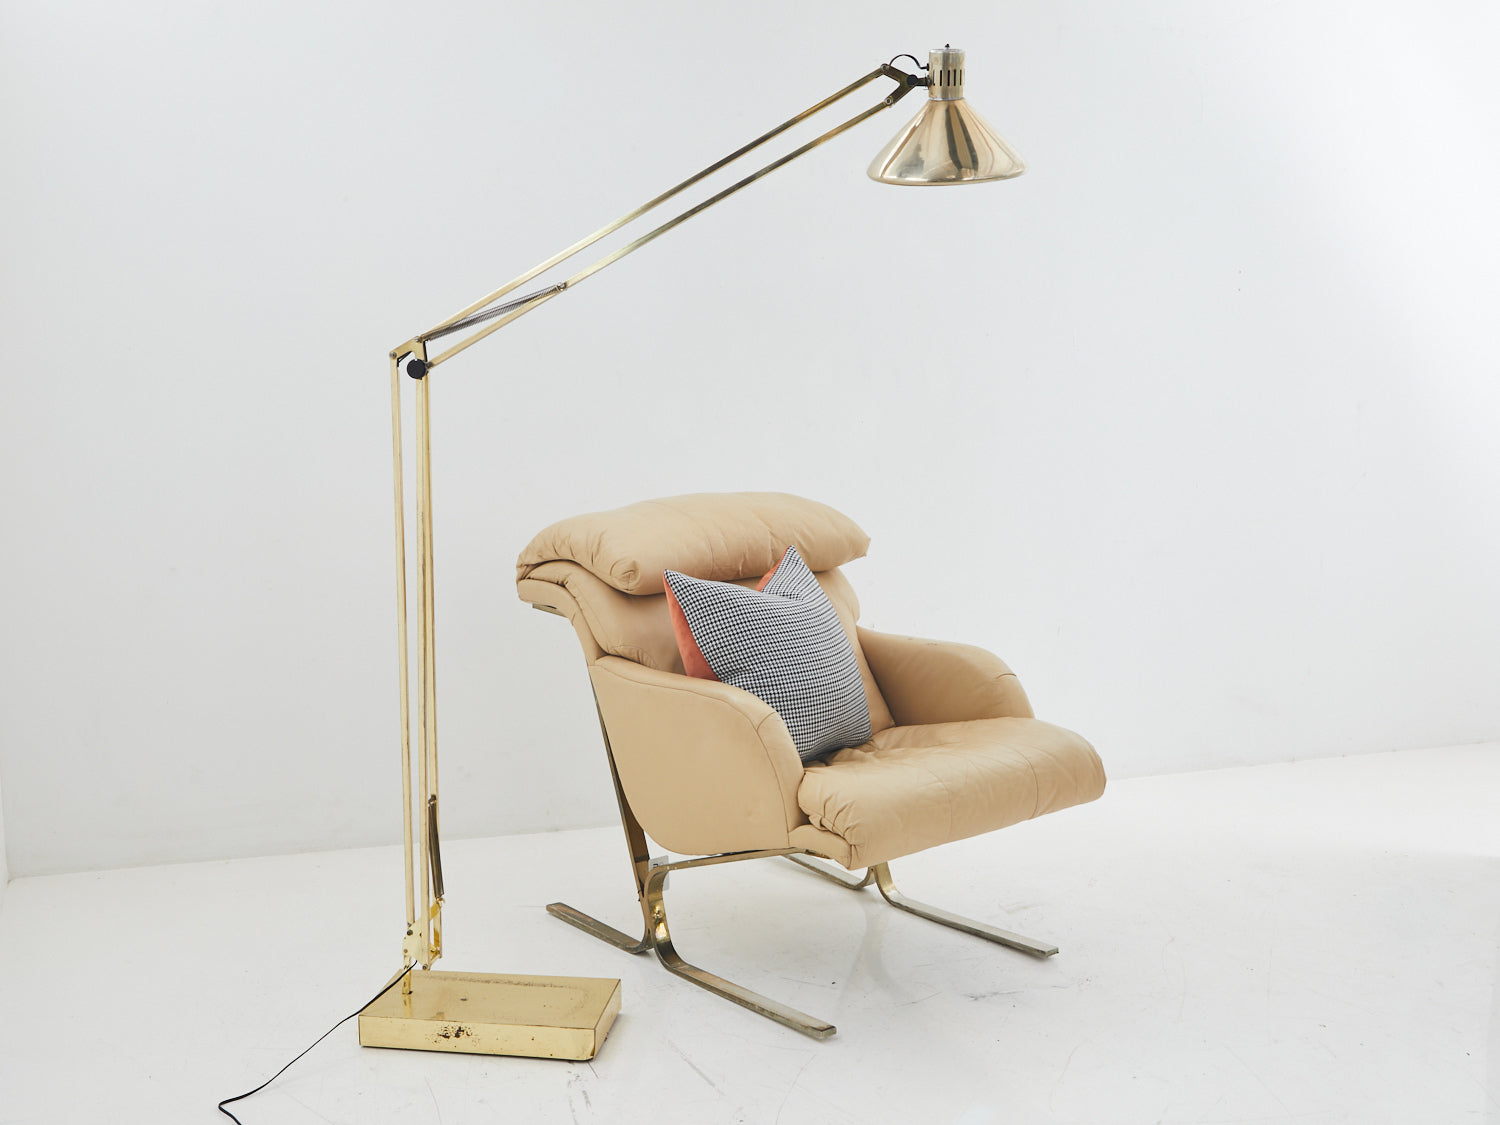 Brass adjustable floor lamp to the left of a tan lounge chair with brass feet